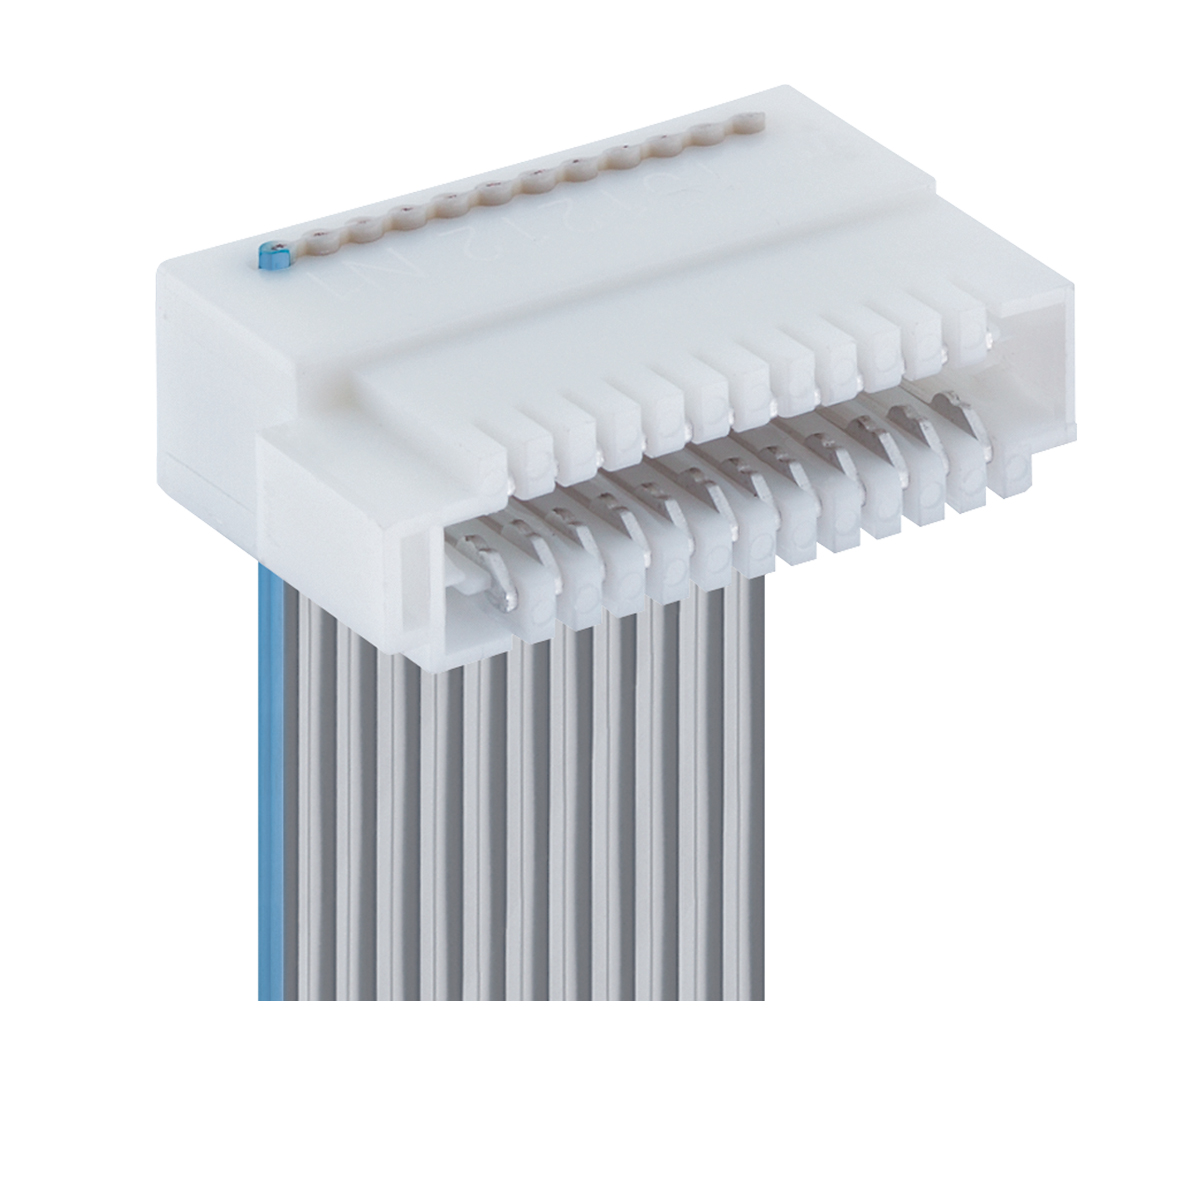 Lumberg: 302299 (Series 30 | Micromodul™ connectors, pitch 1.27 mm)